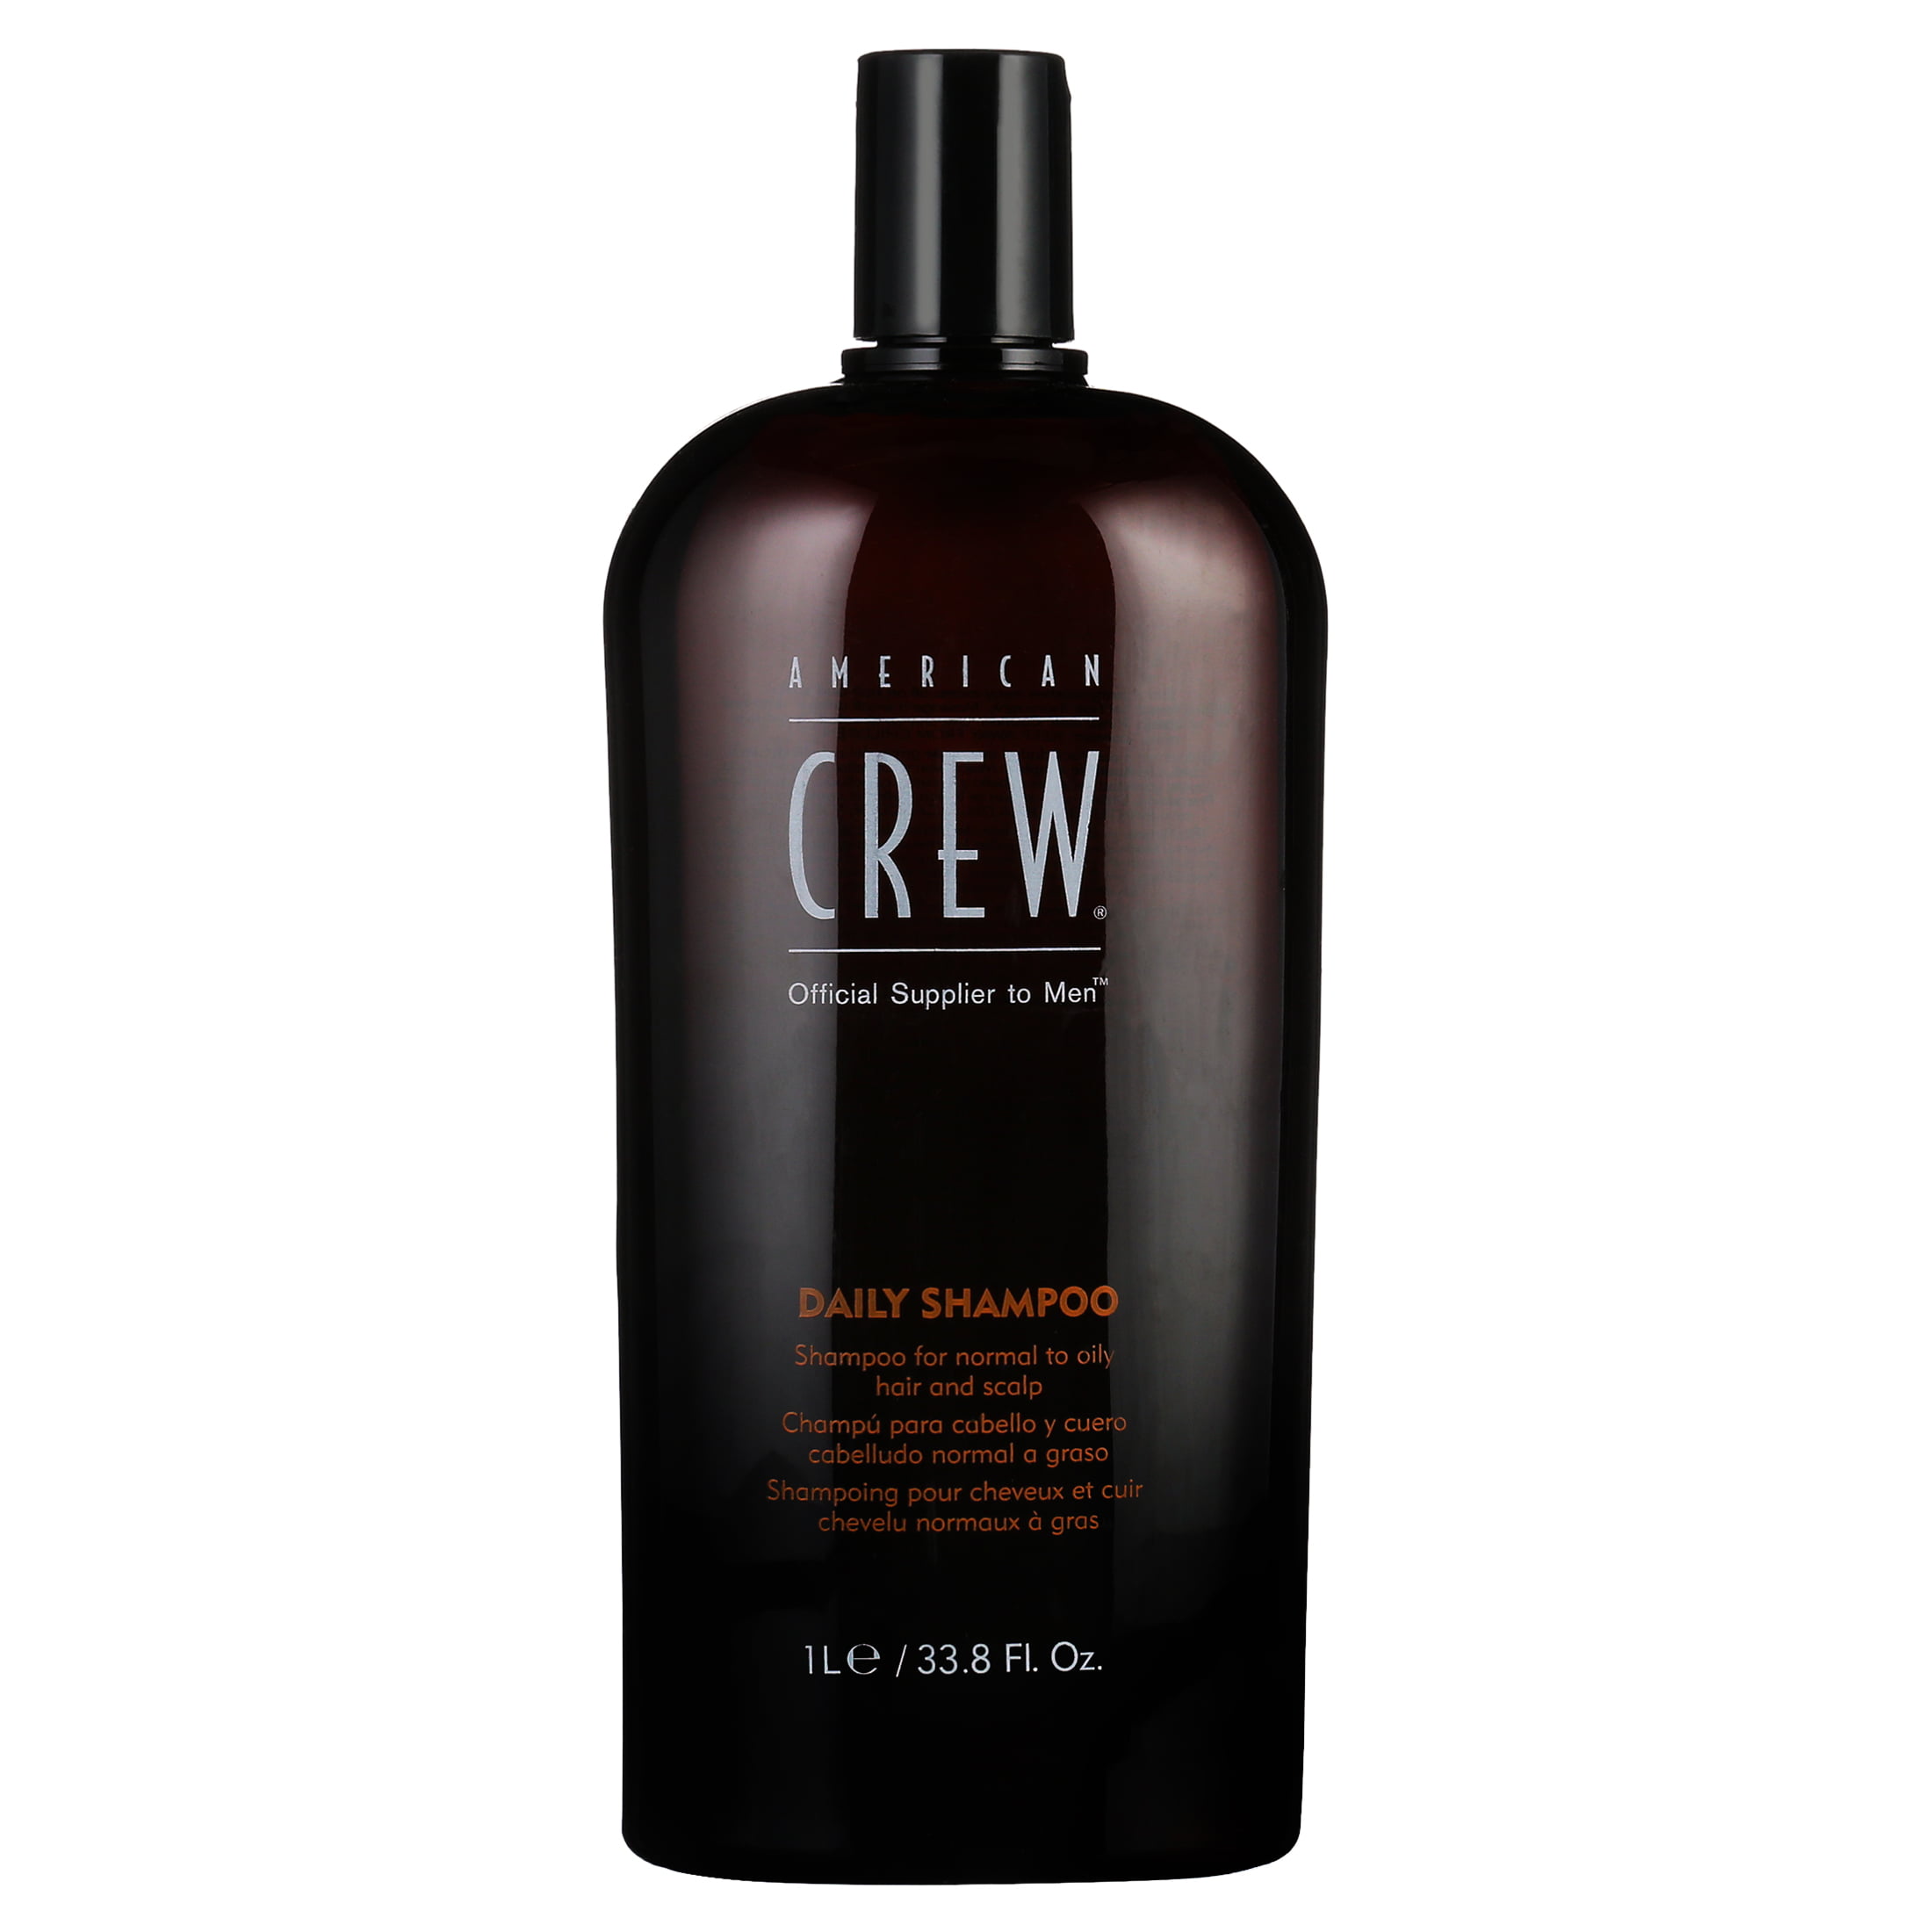 American Crew Official Supplier to Men Moisturizing & Shine Daily with Wheat Protein & Rosemary, 33.8 fl oz - Walmart.com